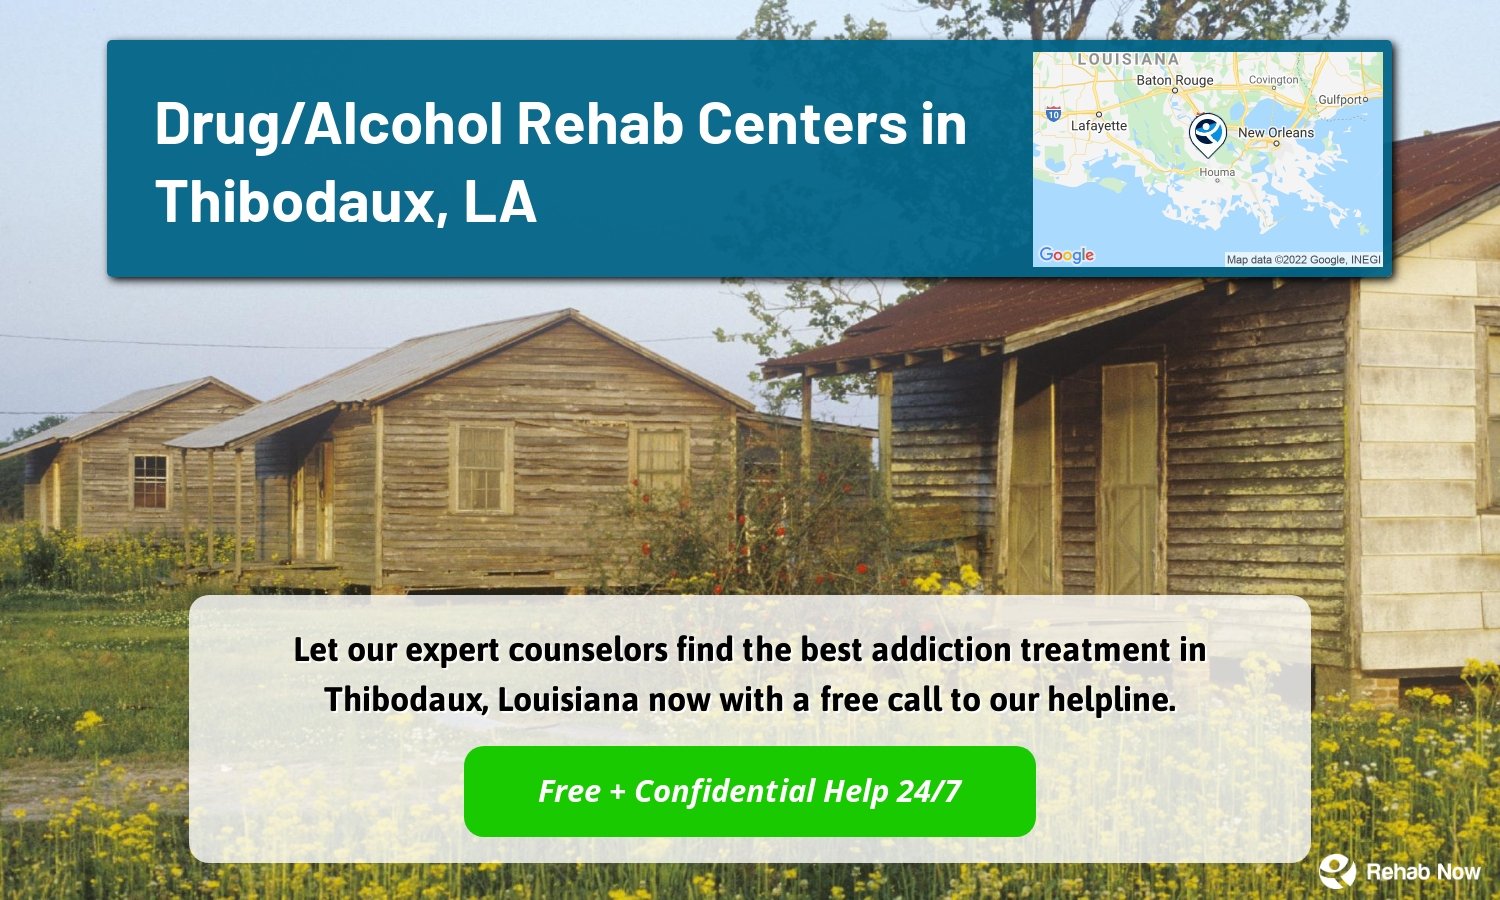 Let our expert counselors find the best addiction treatment in Thibodaux, Louisiana now with a free call to our helpline.